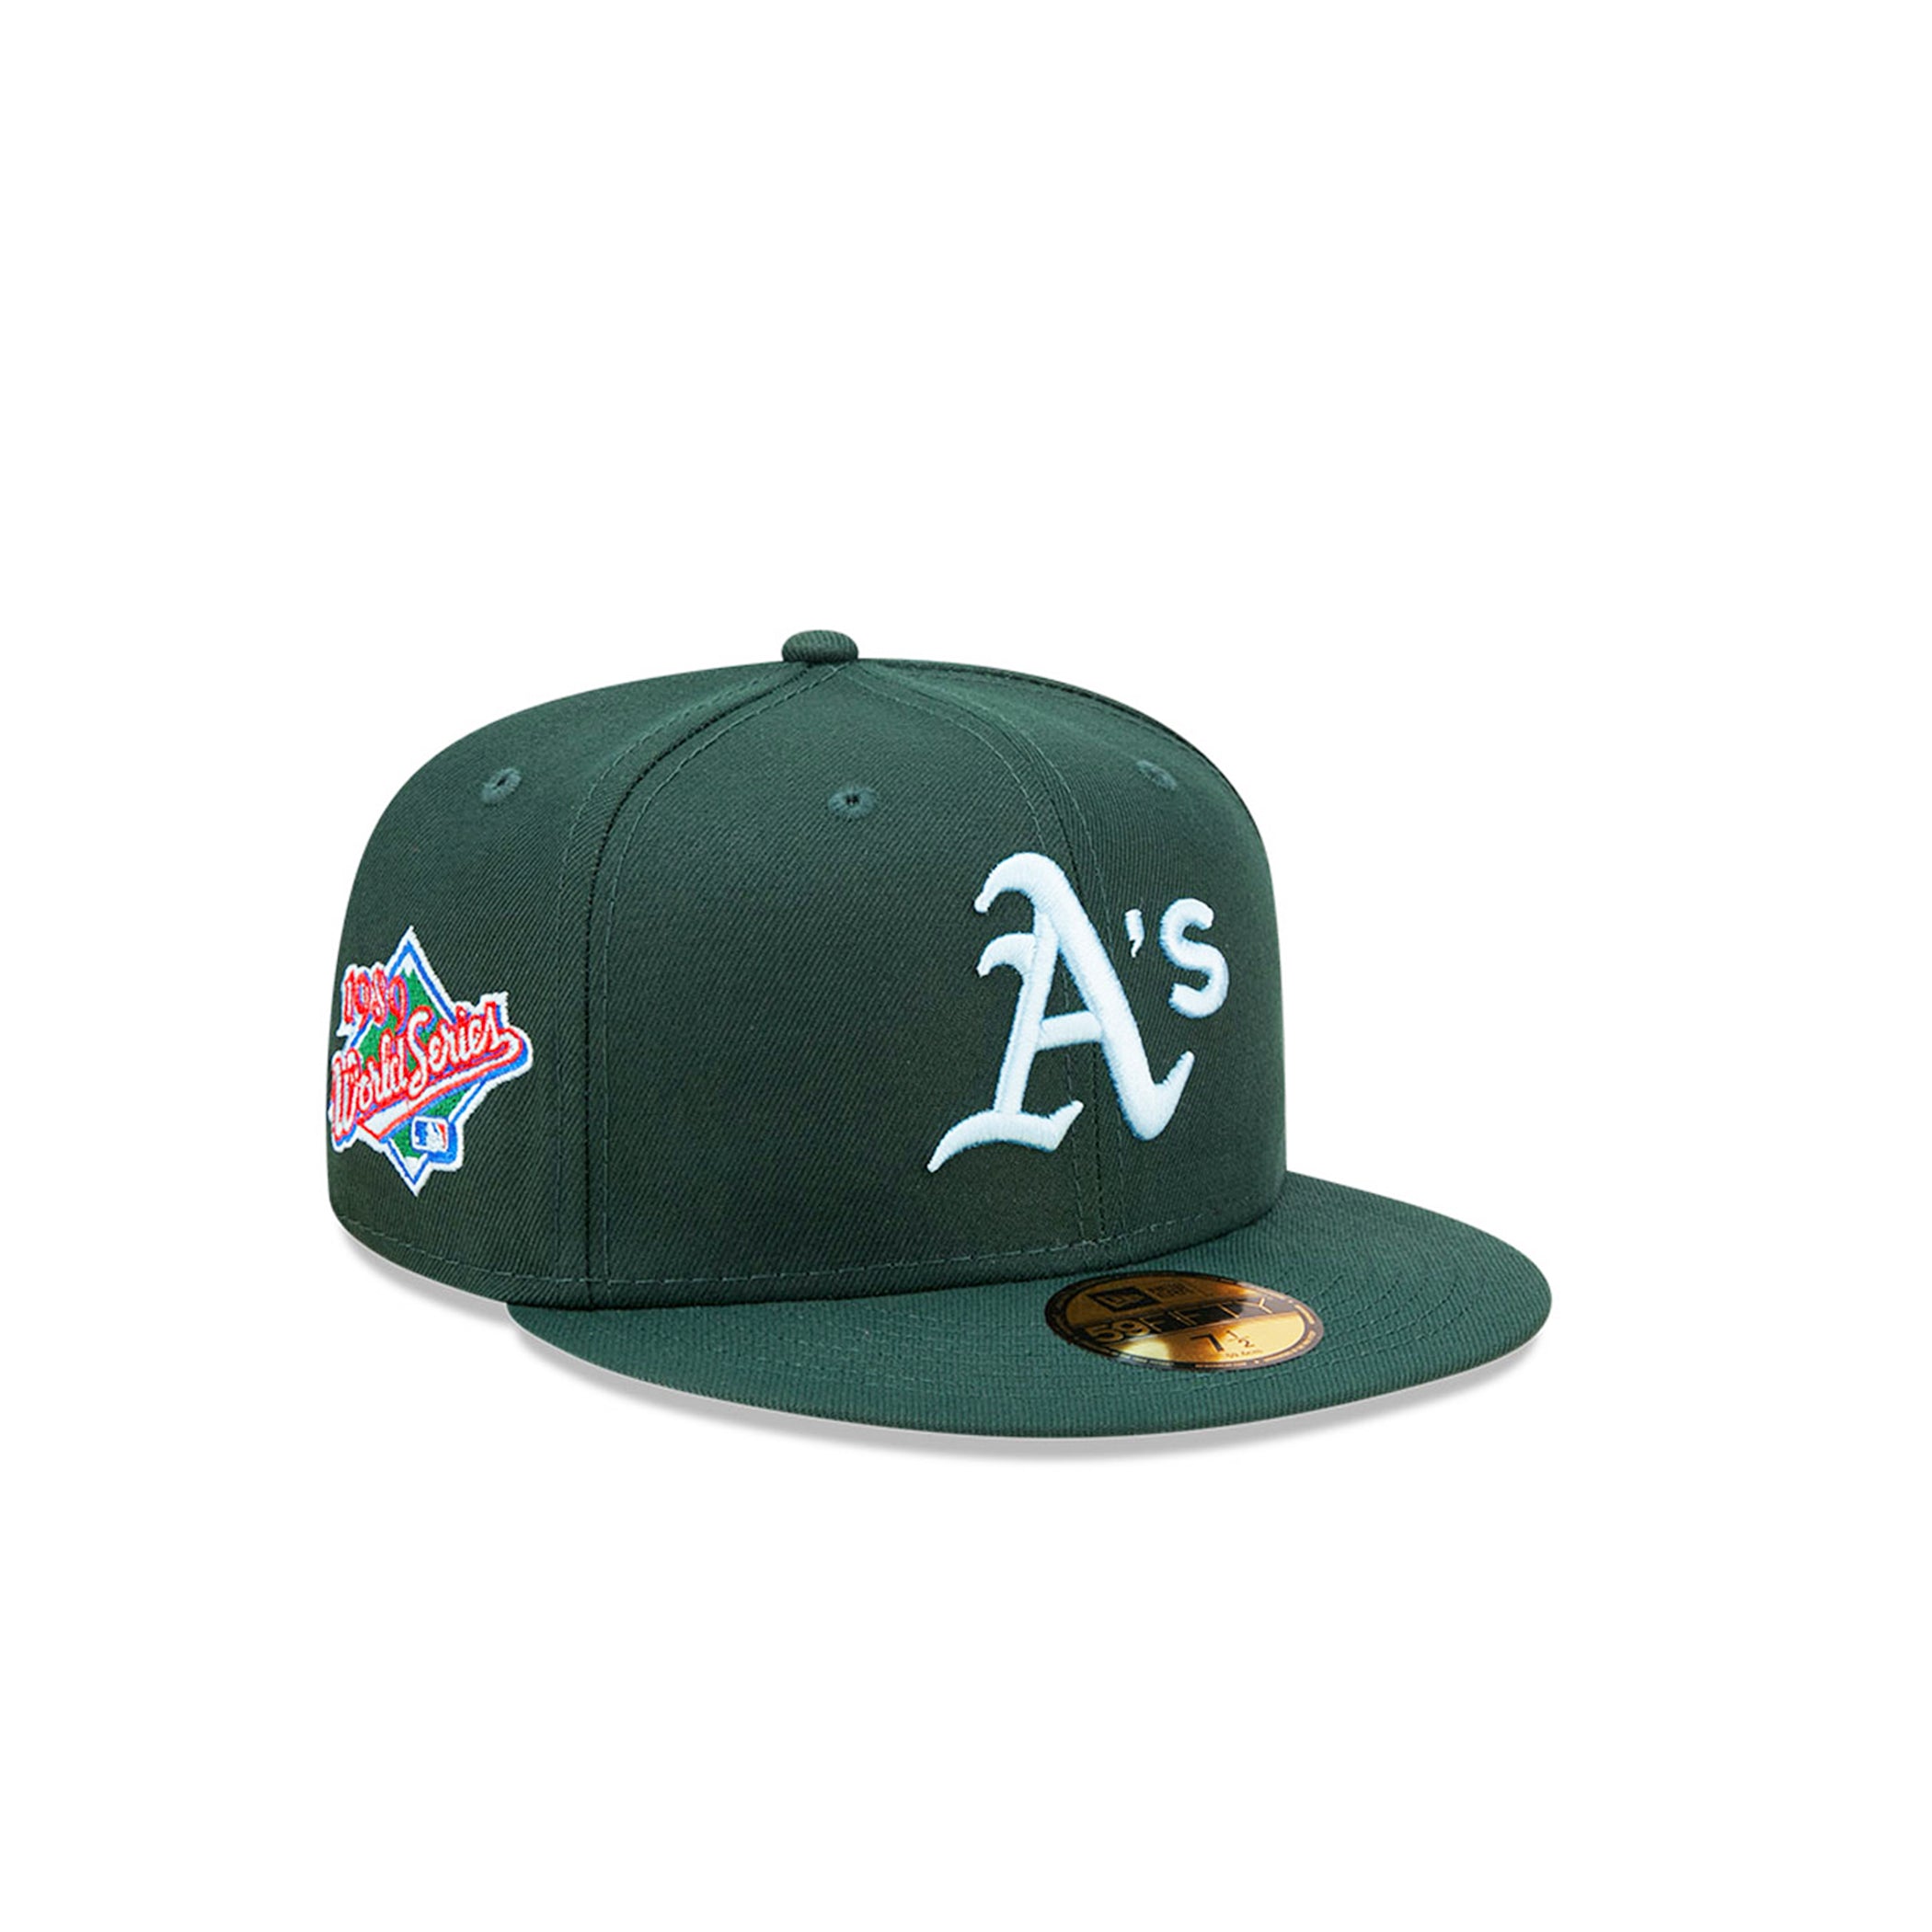 New! Rare! Oakland A's 2021 4th of July On Field Hat New Era 59FIFTY Size 8.